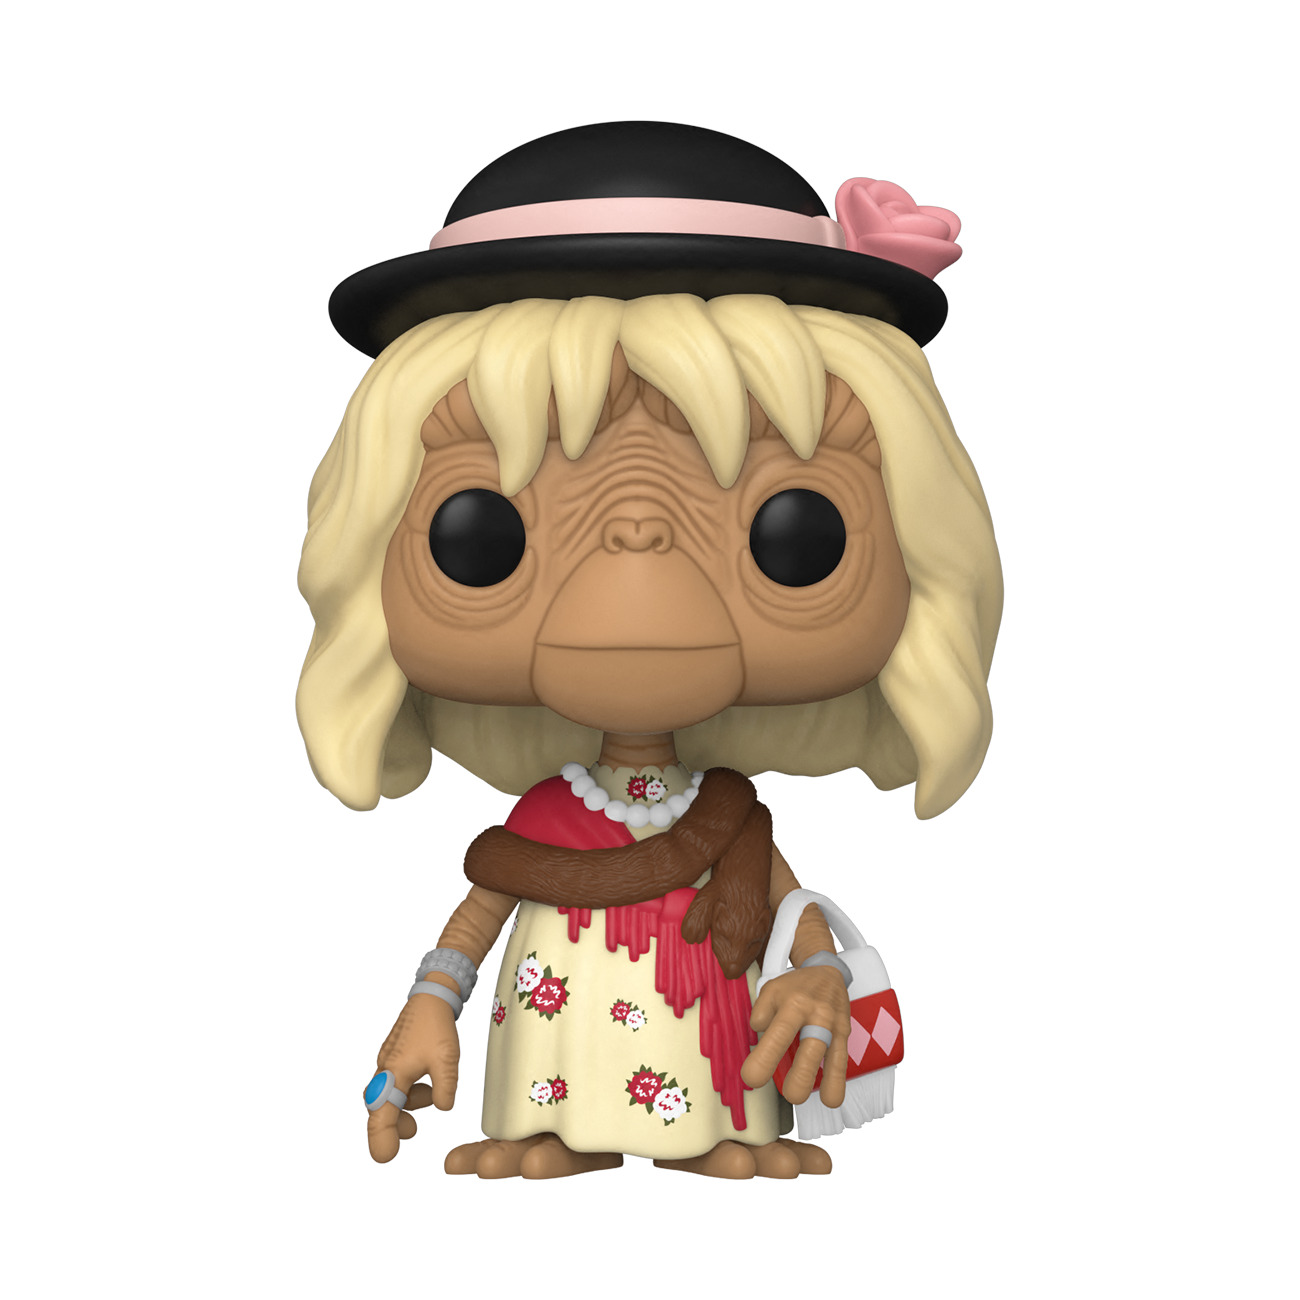 Funko Pop Movies: E.T. The Extra-Terrestrial - E.T. in Disguise